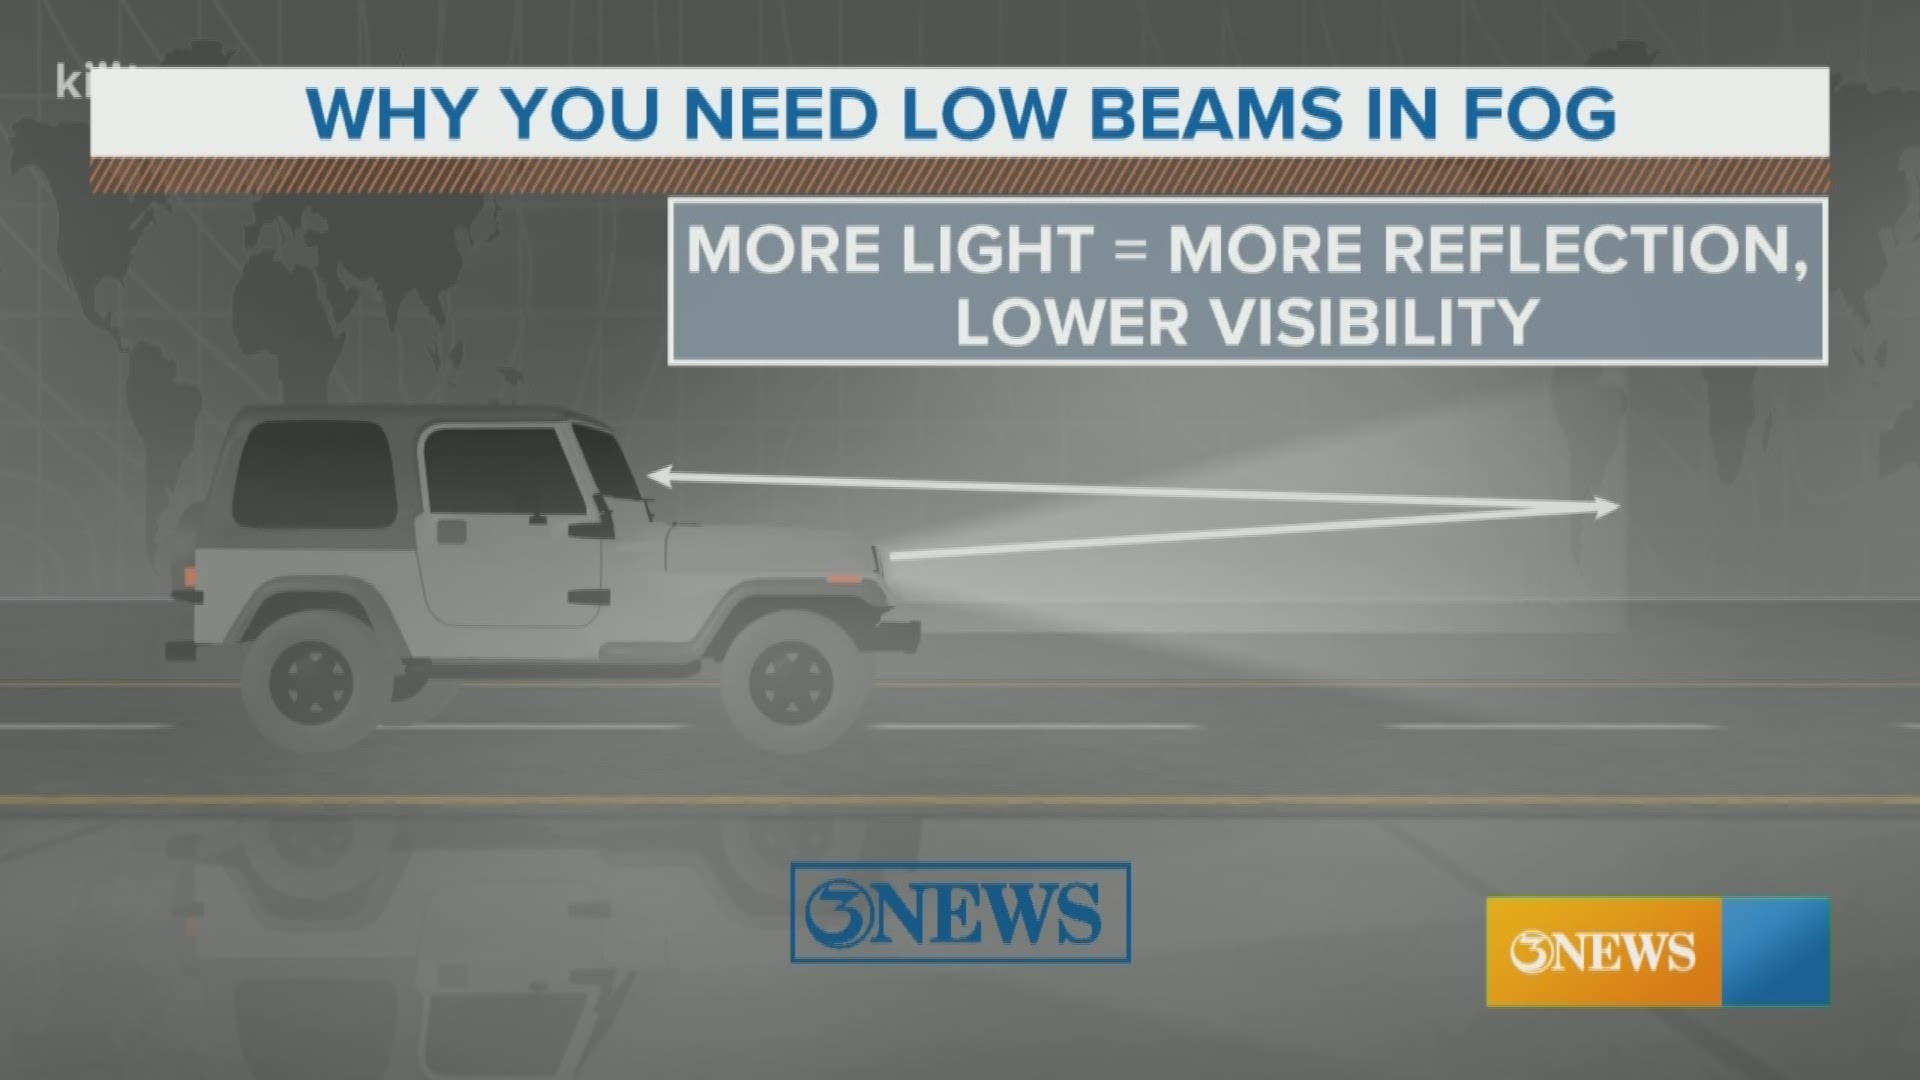 High beam lights make visibility worse in dense fog, reflecting more light back to you, making it harder to see.